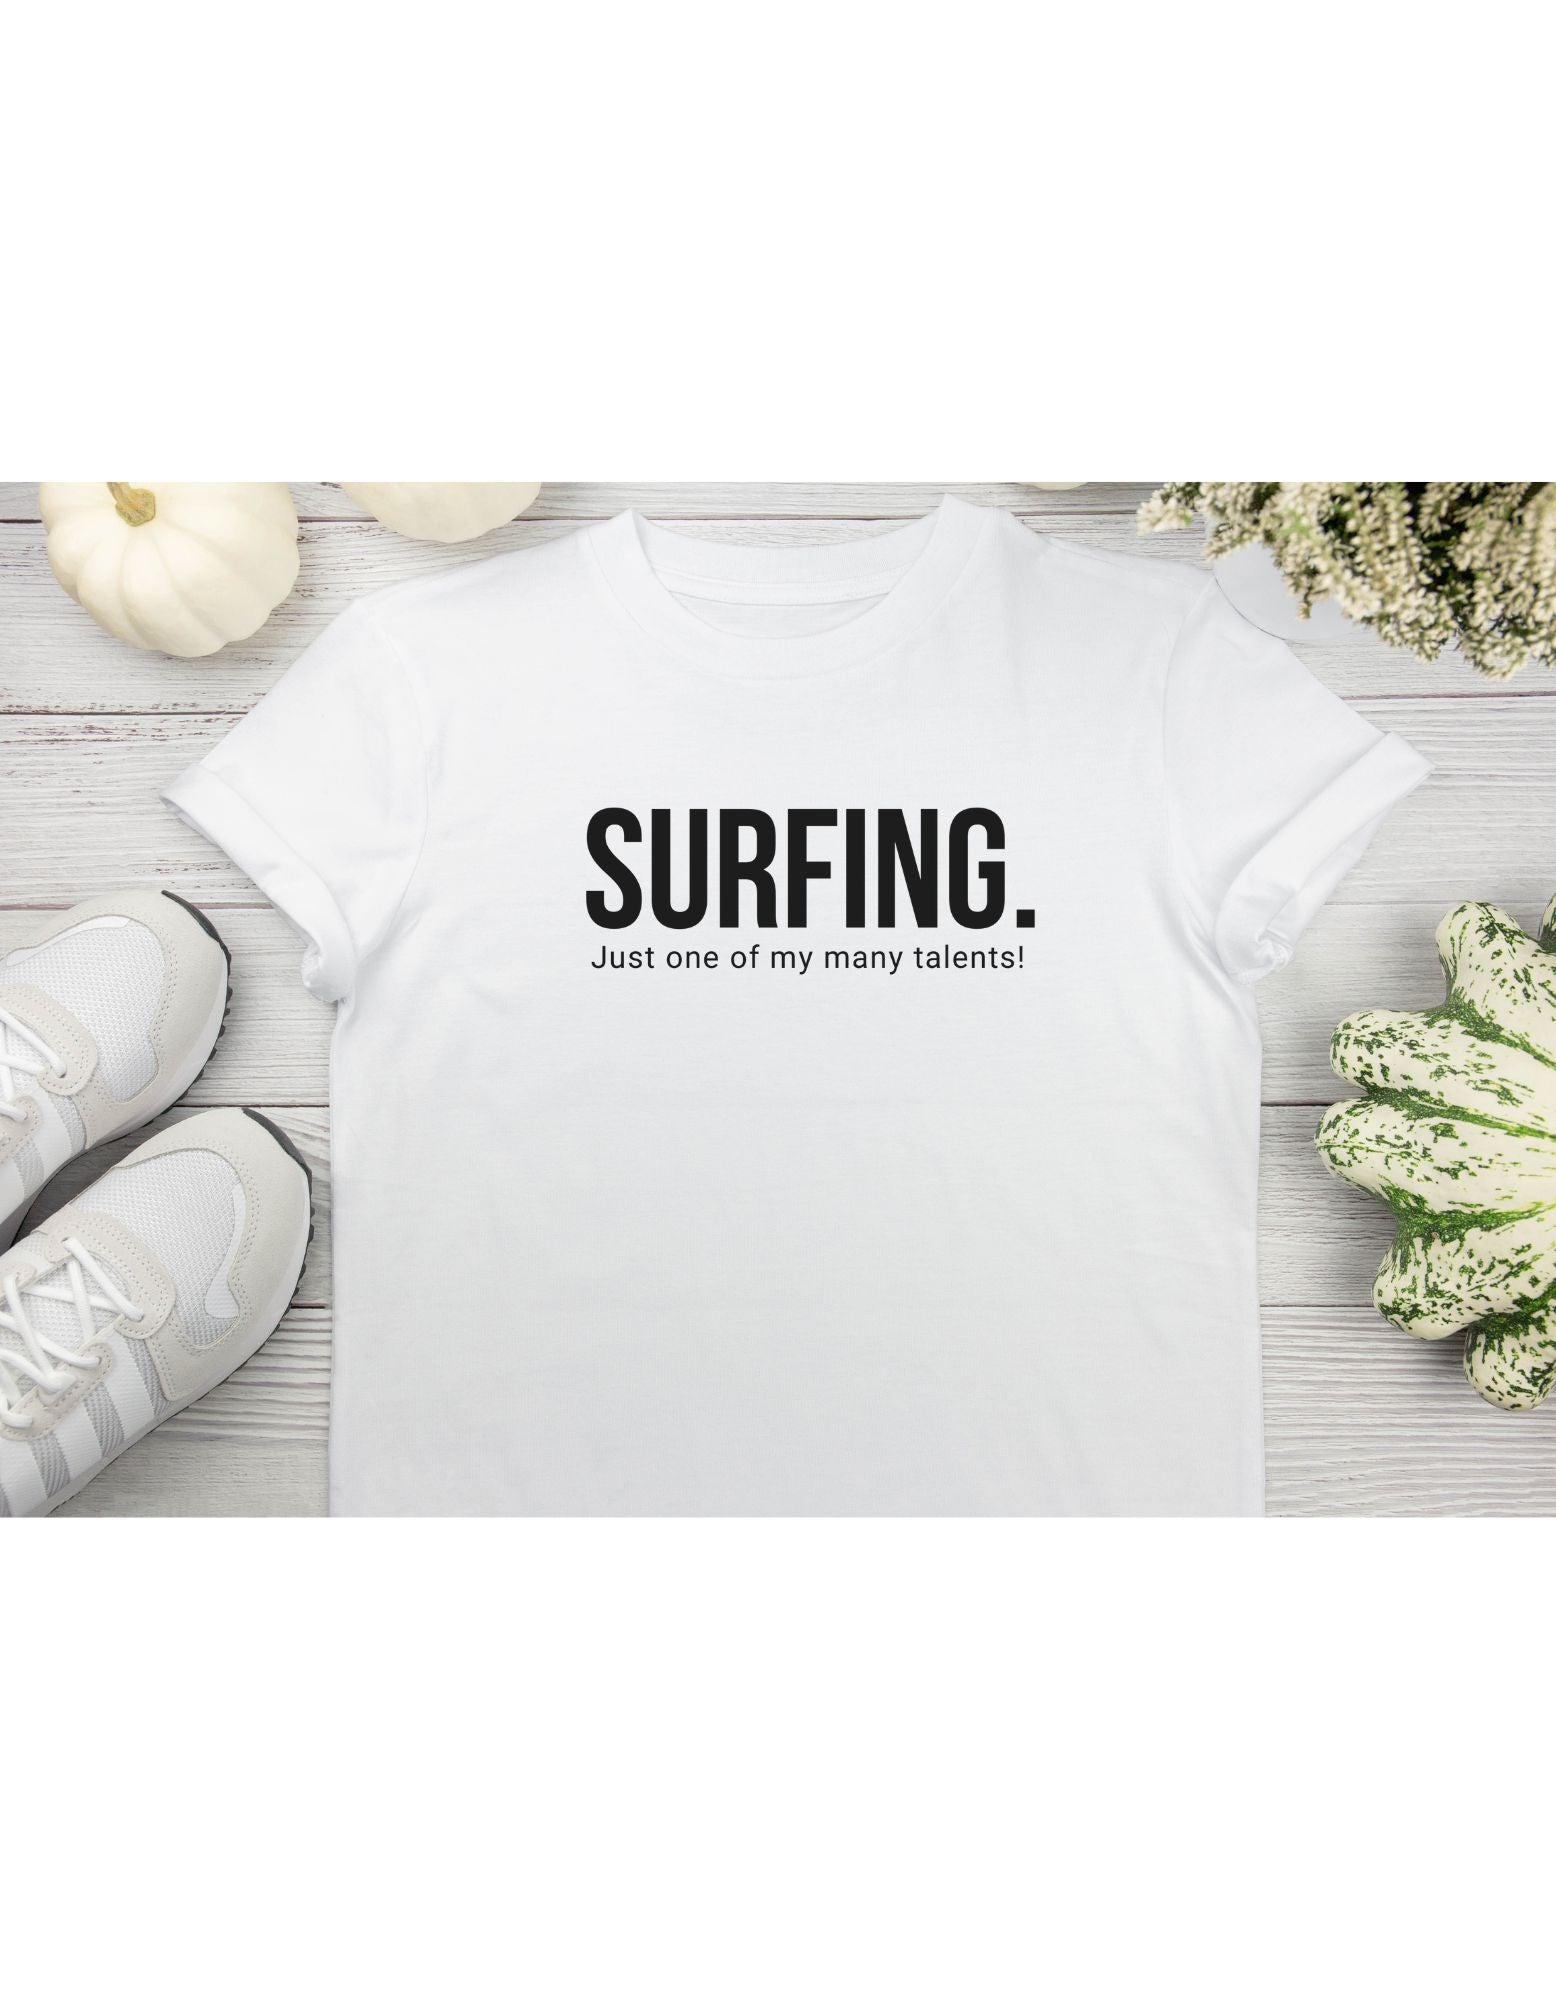 Surfing. Just one of my many talents Tshirt - Collage.The Label - PeppaTree Design Store